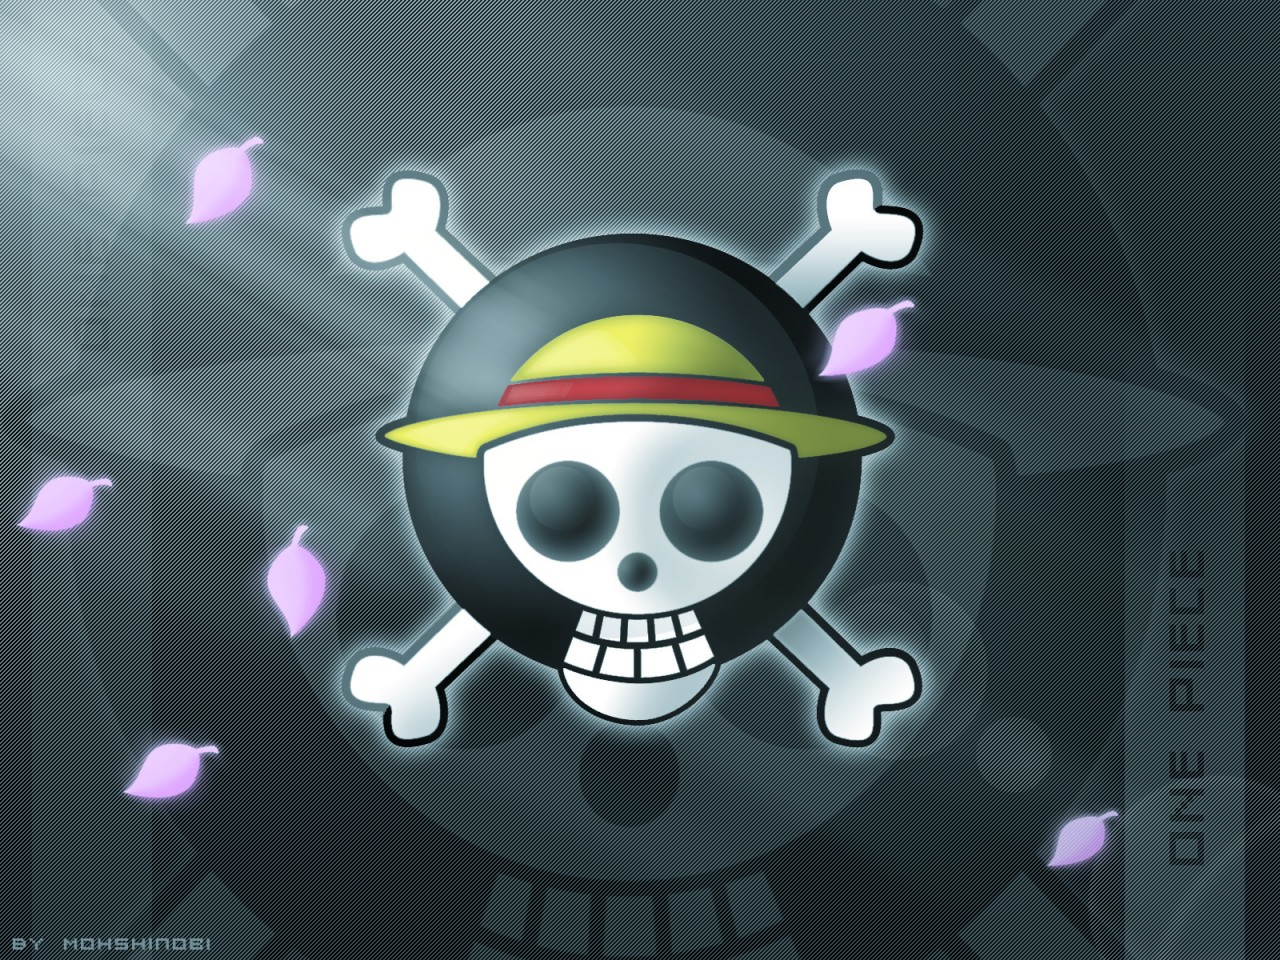 Free download One Piece Straw Hat Logo Wallpaper One Piece Anime Wallpaper [1280x960] for your Desktop, Mobile & Tablet. Explore One Piece Straw Hat Wallpaper. One Piece Straw Hat